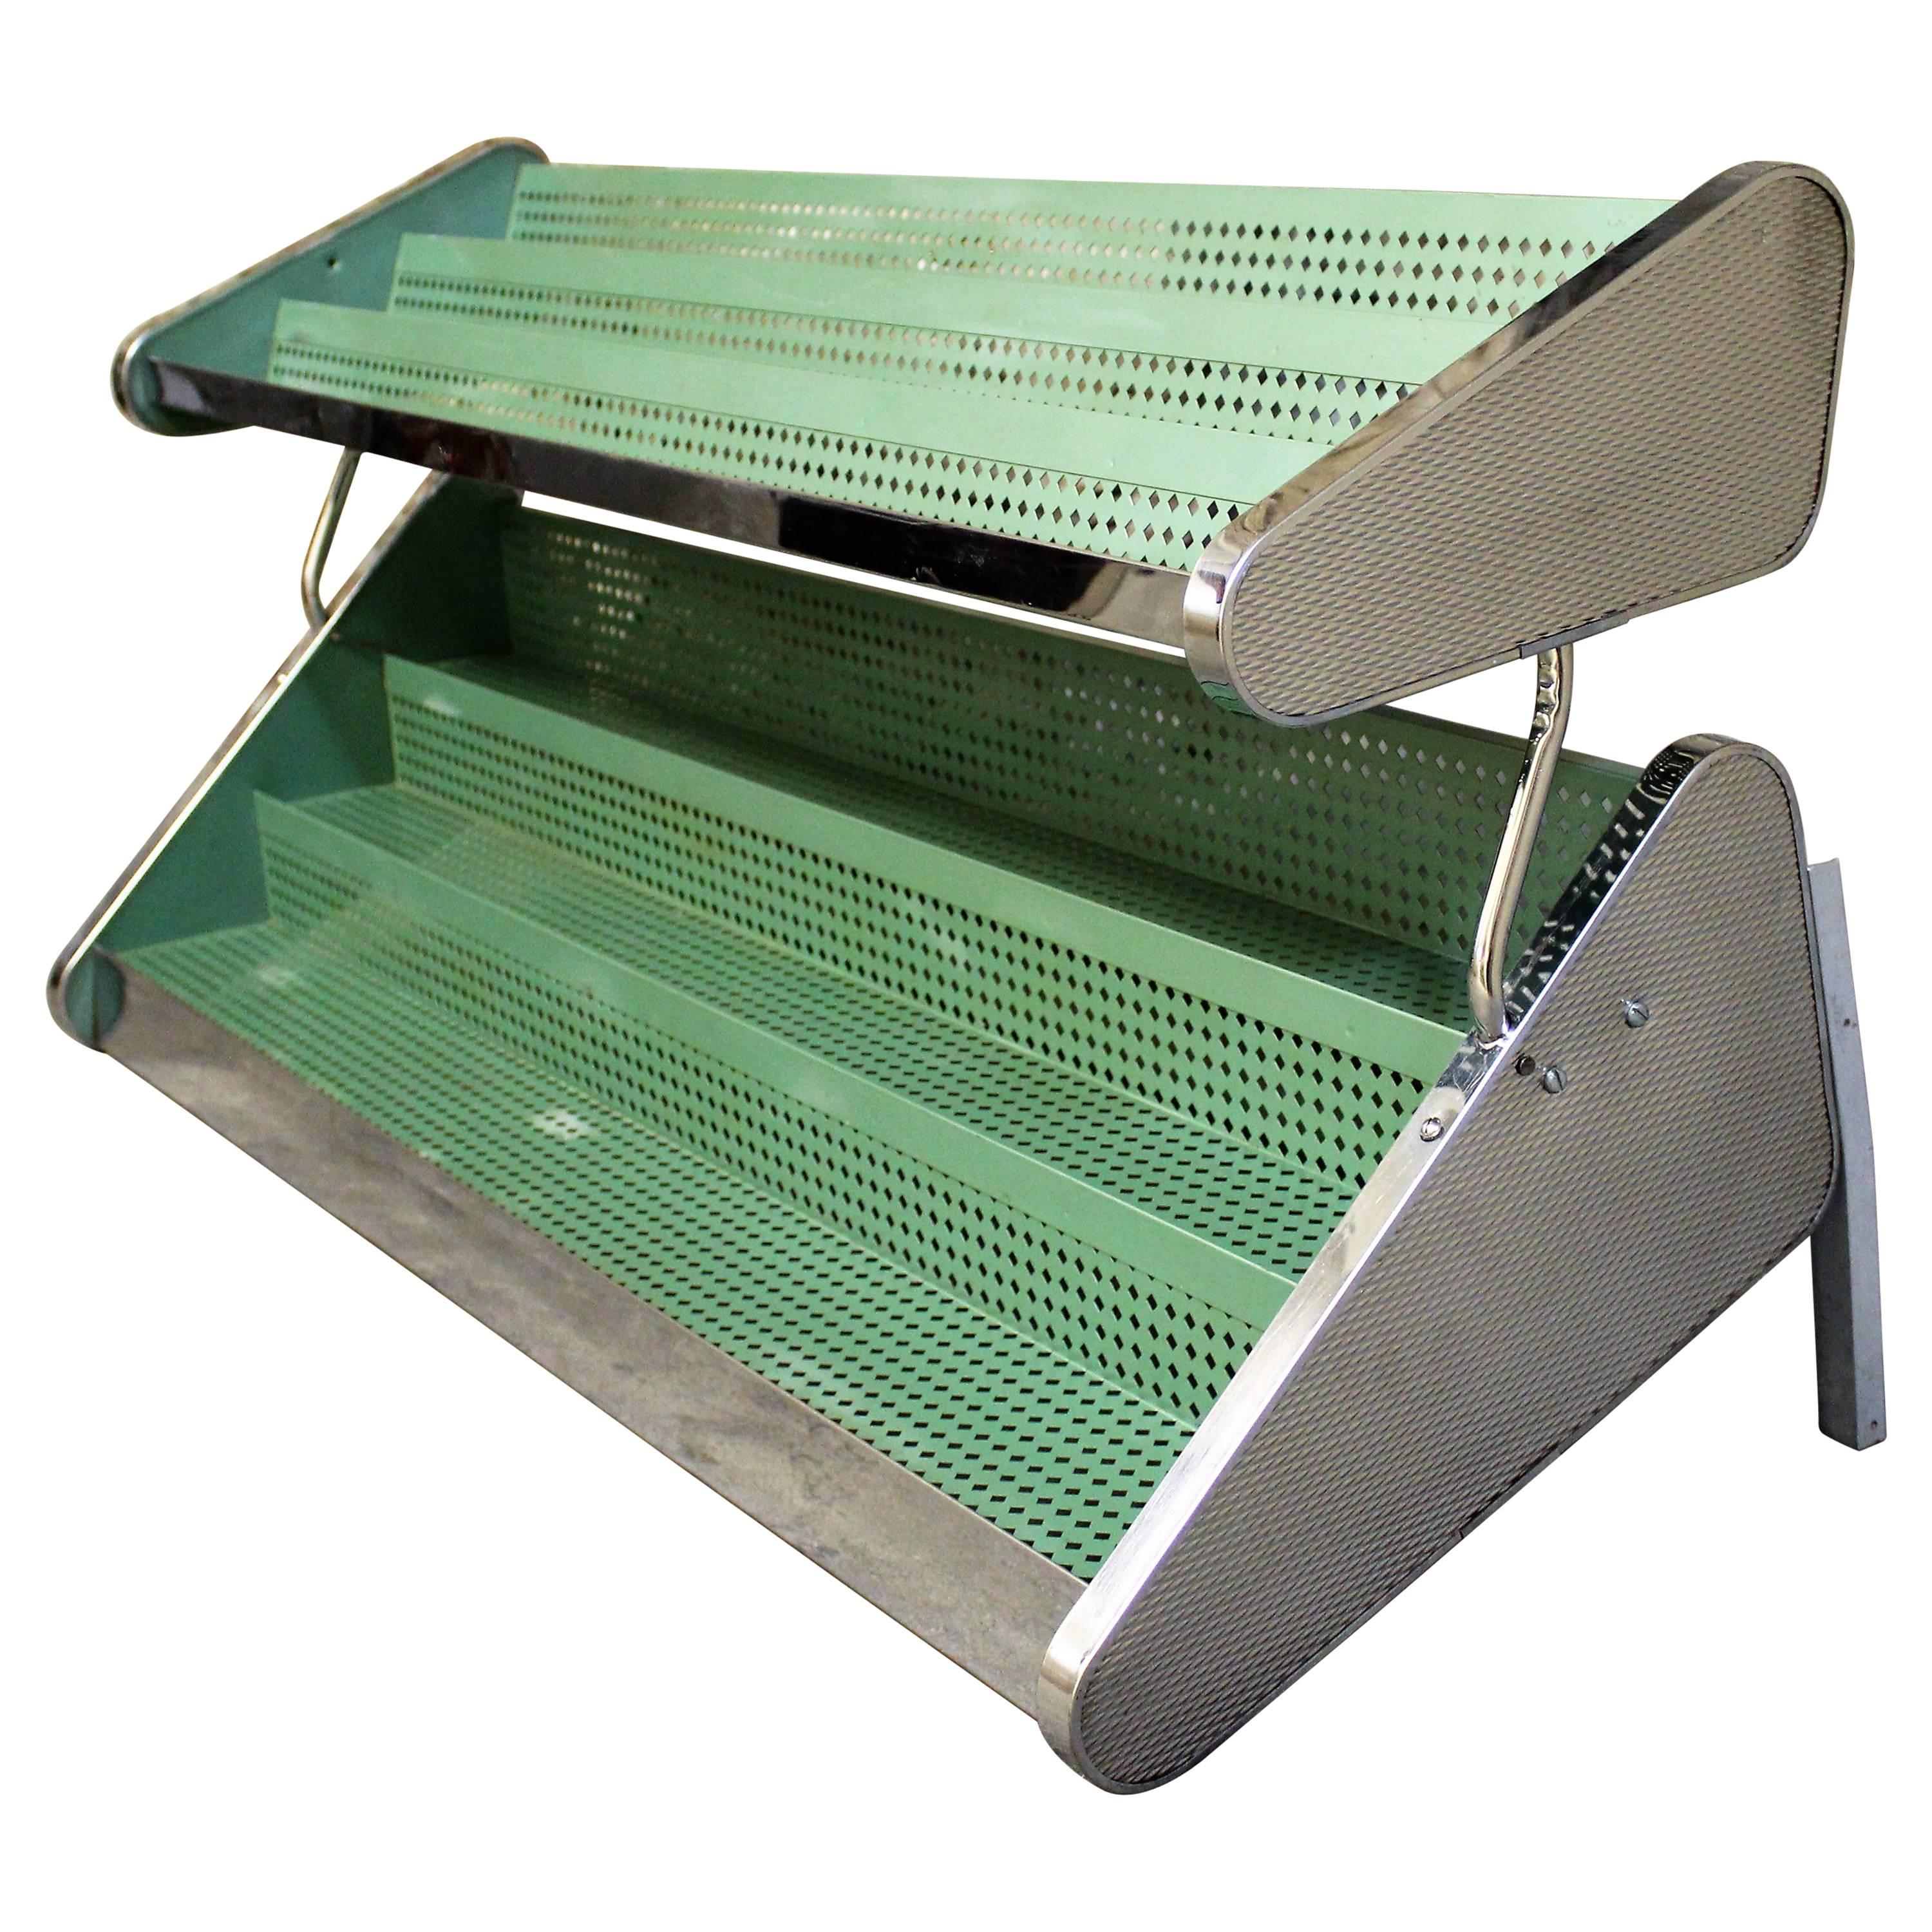 Wrigley's Gum Counter Top Display Shelving Unit, 1940s Metal and Chrome